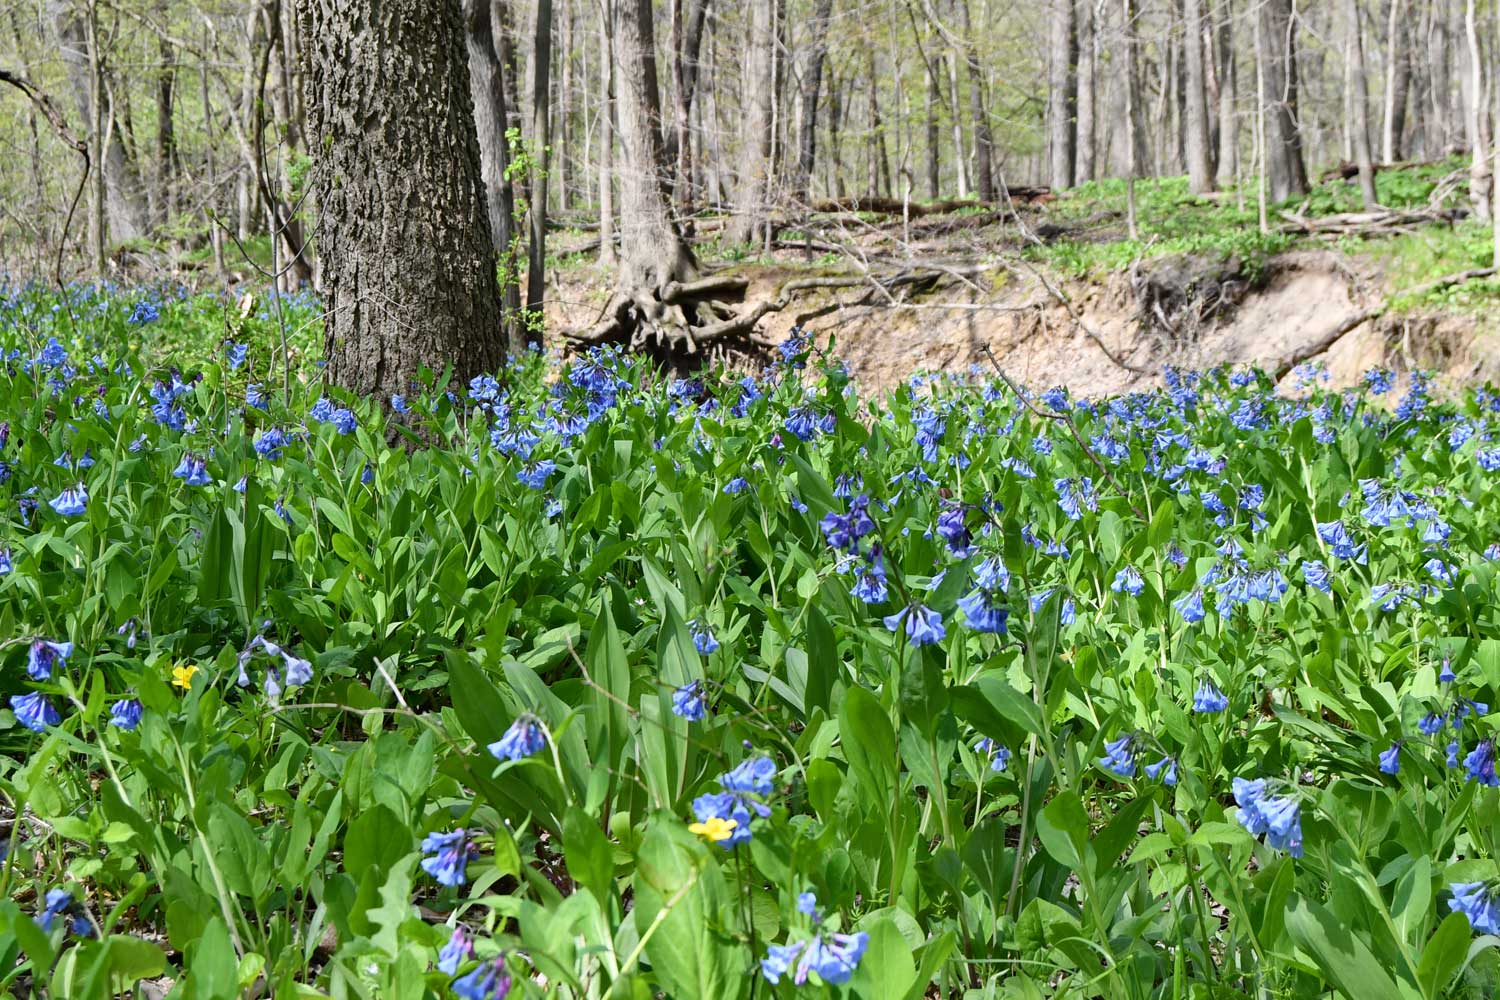 Virginia bluebell blooms along a trail.